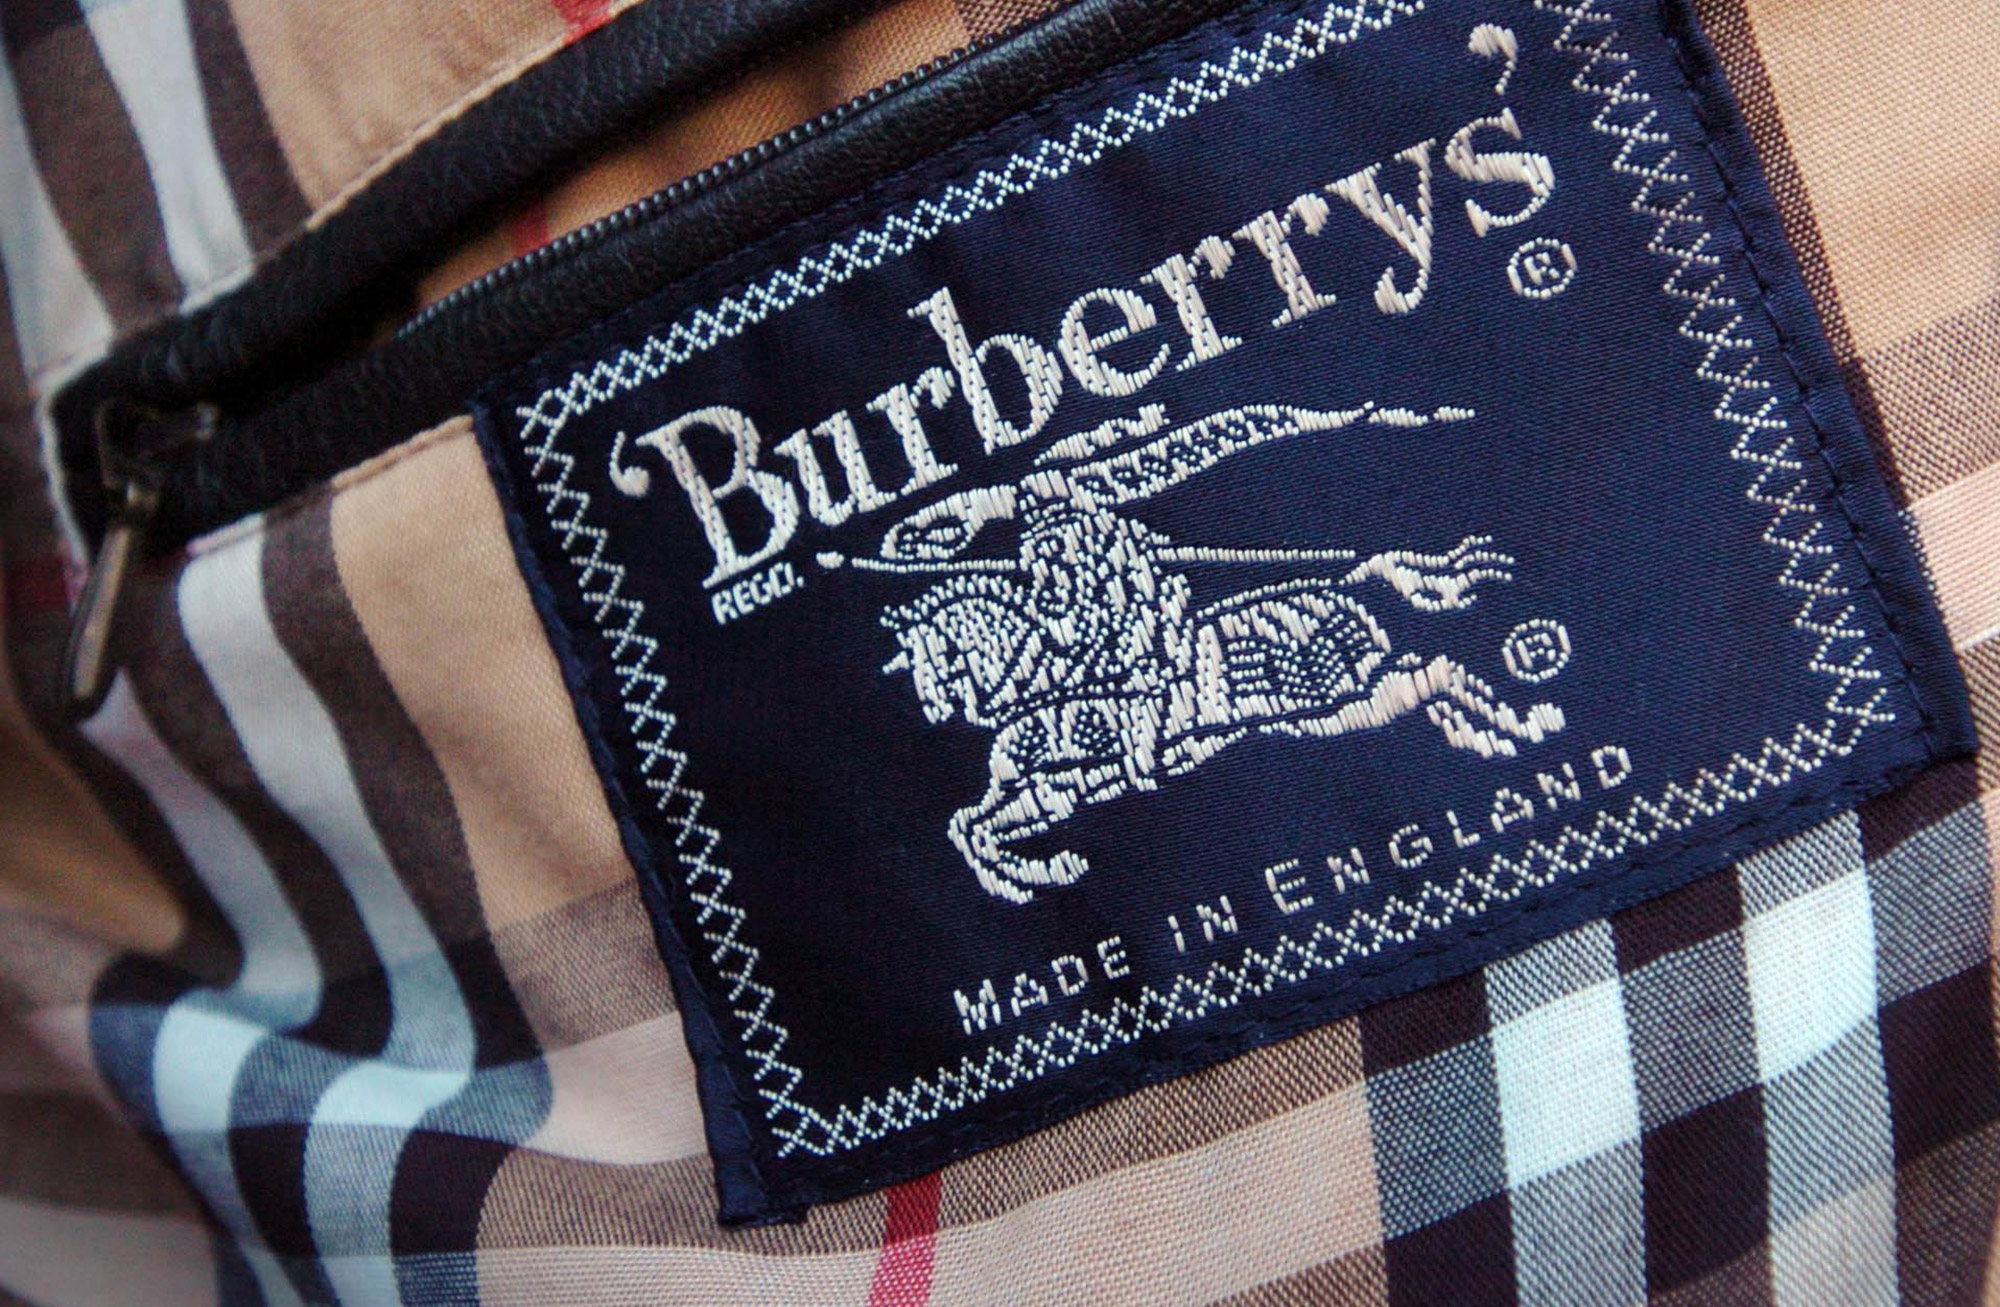 Five Things to Know About Burberry and Licenses